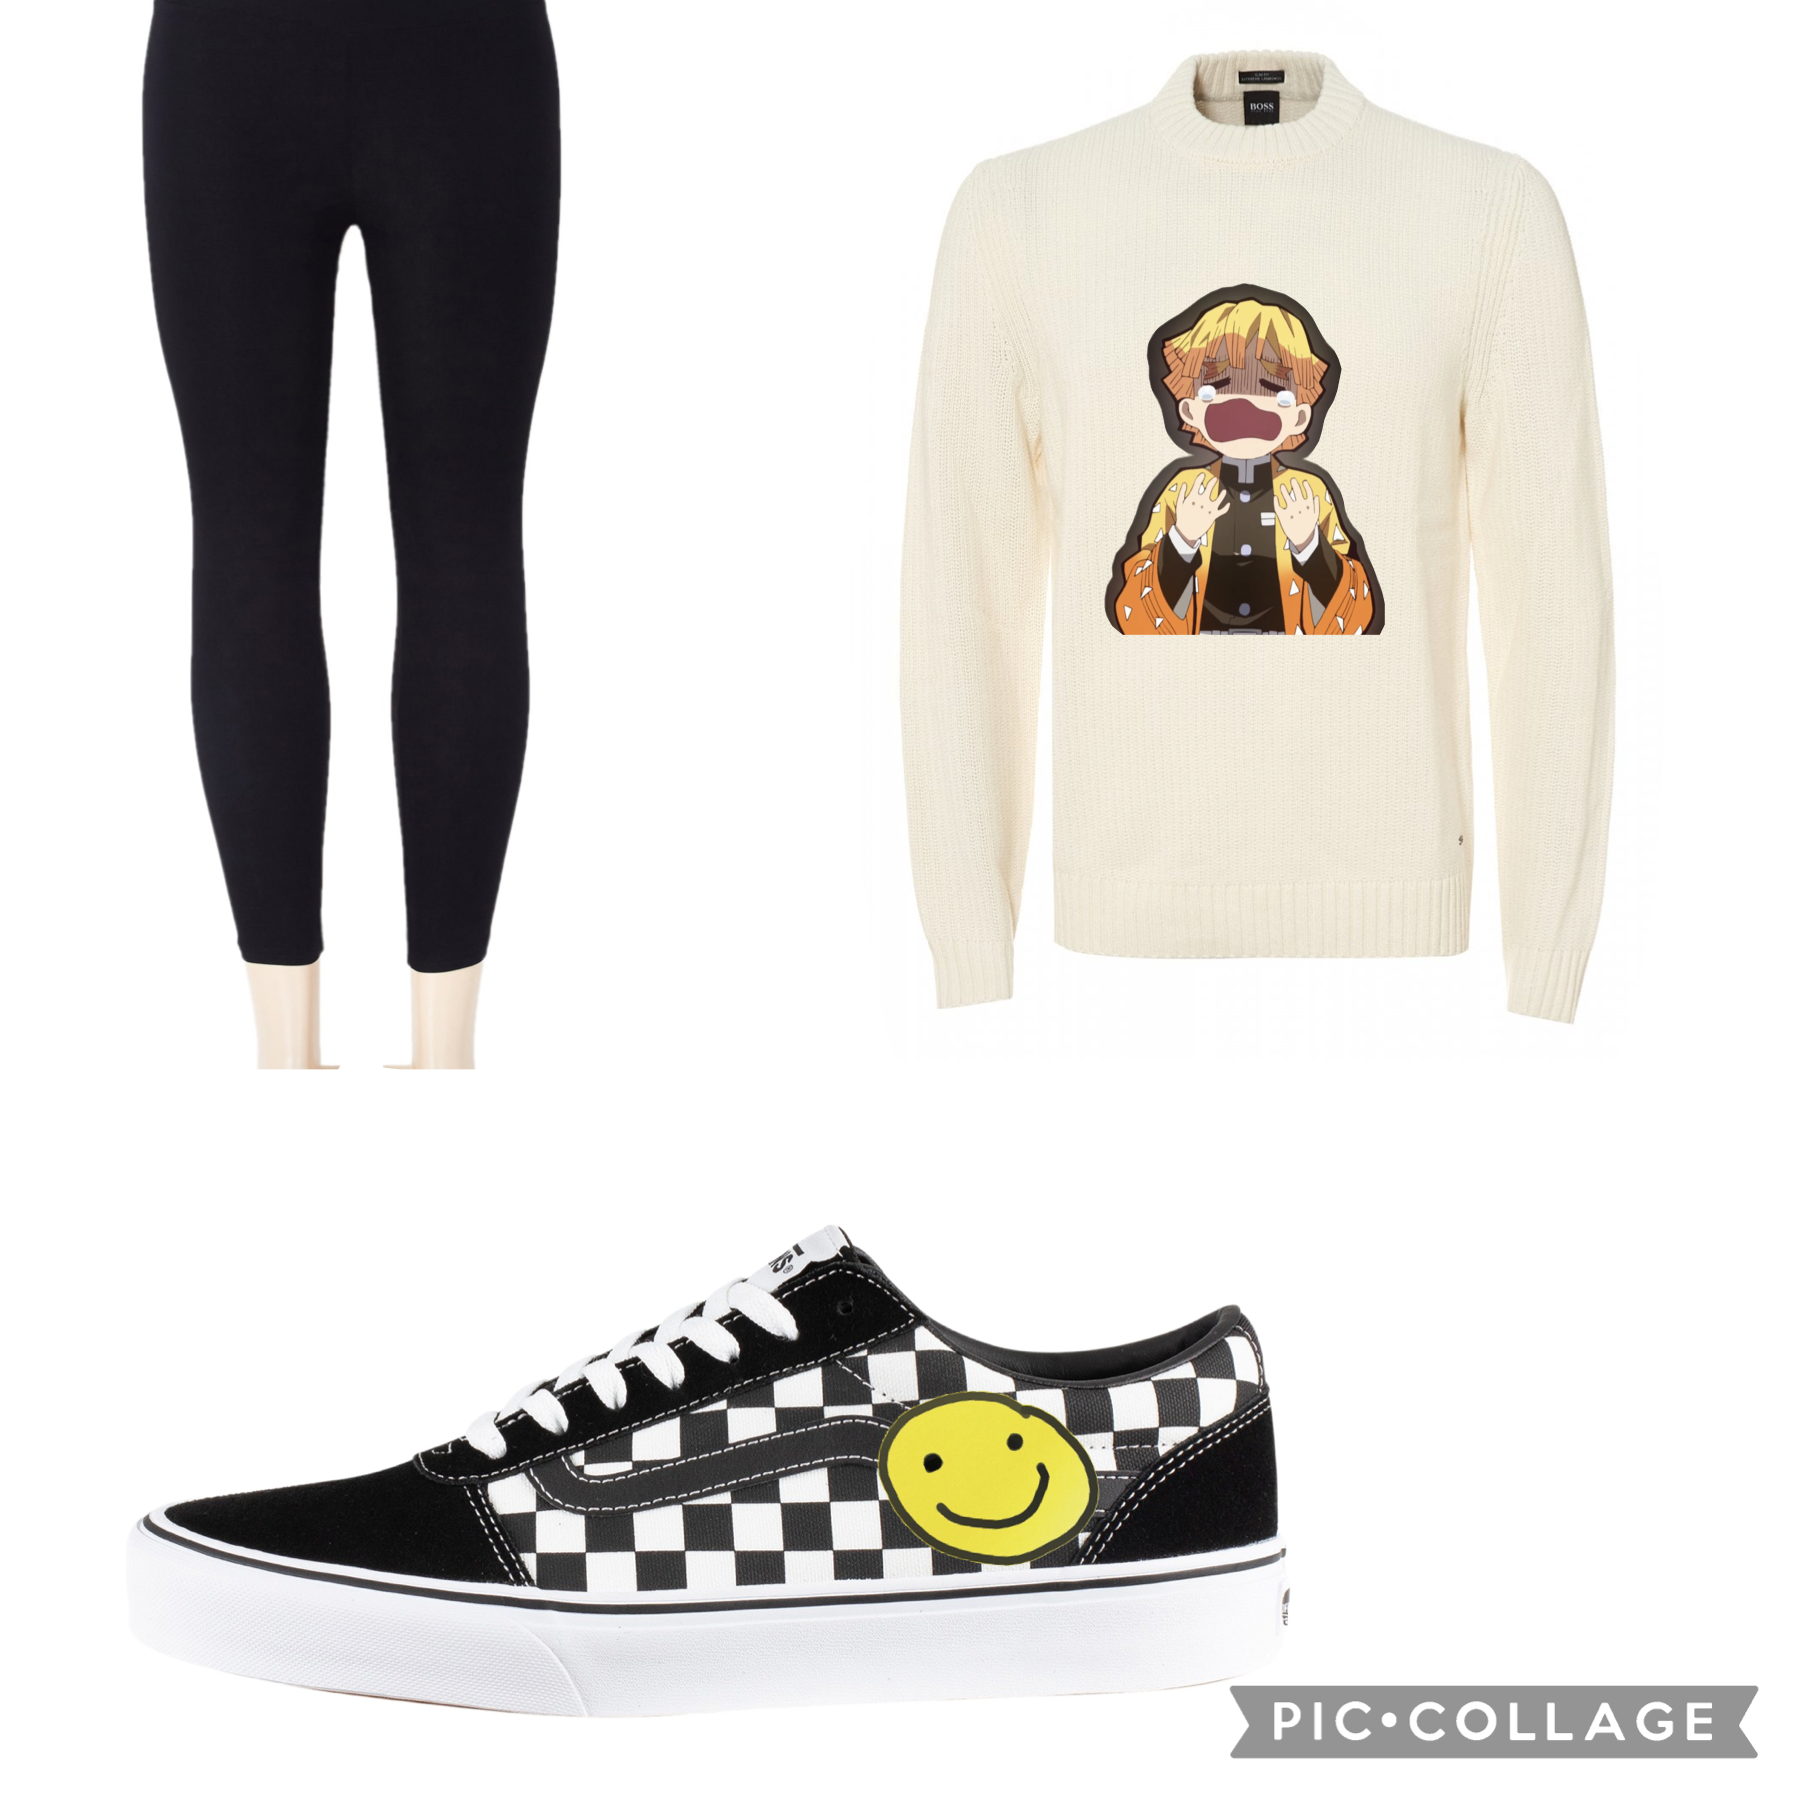 What I would wear if I had